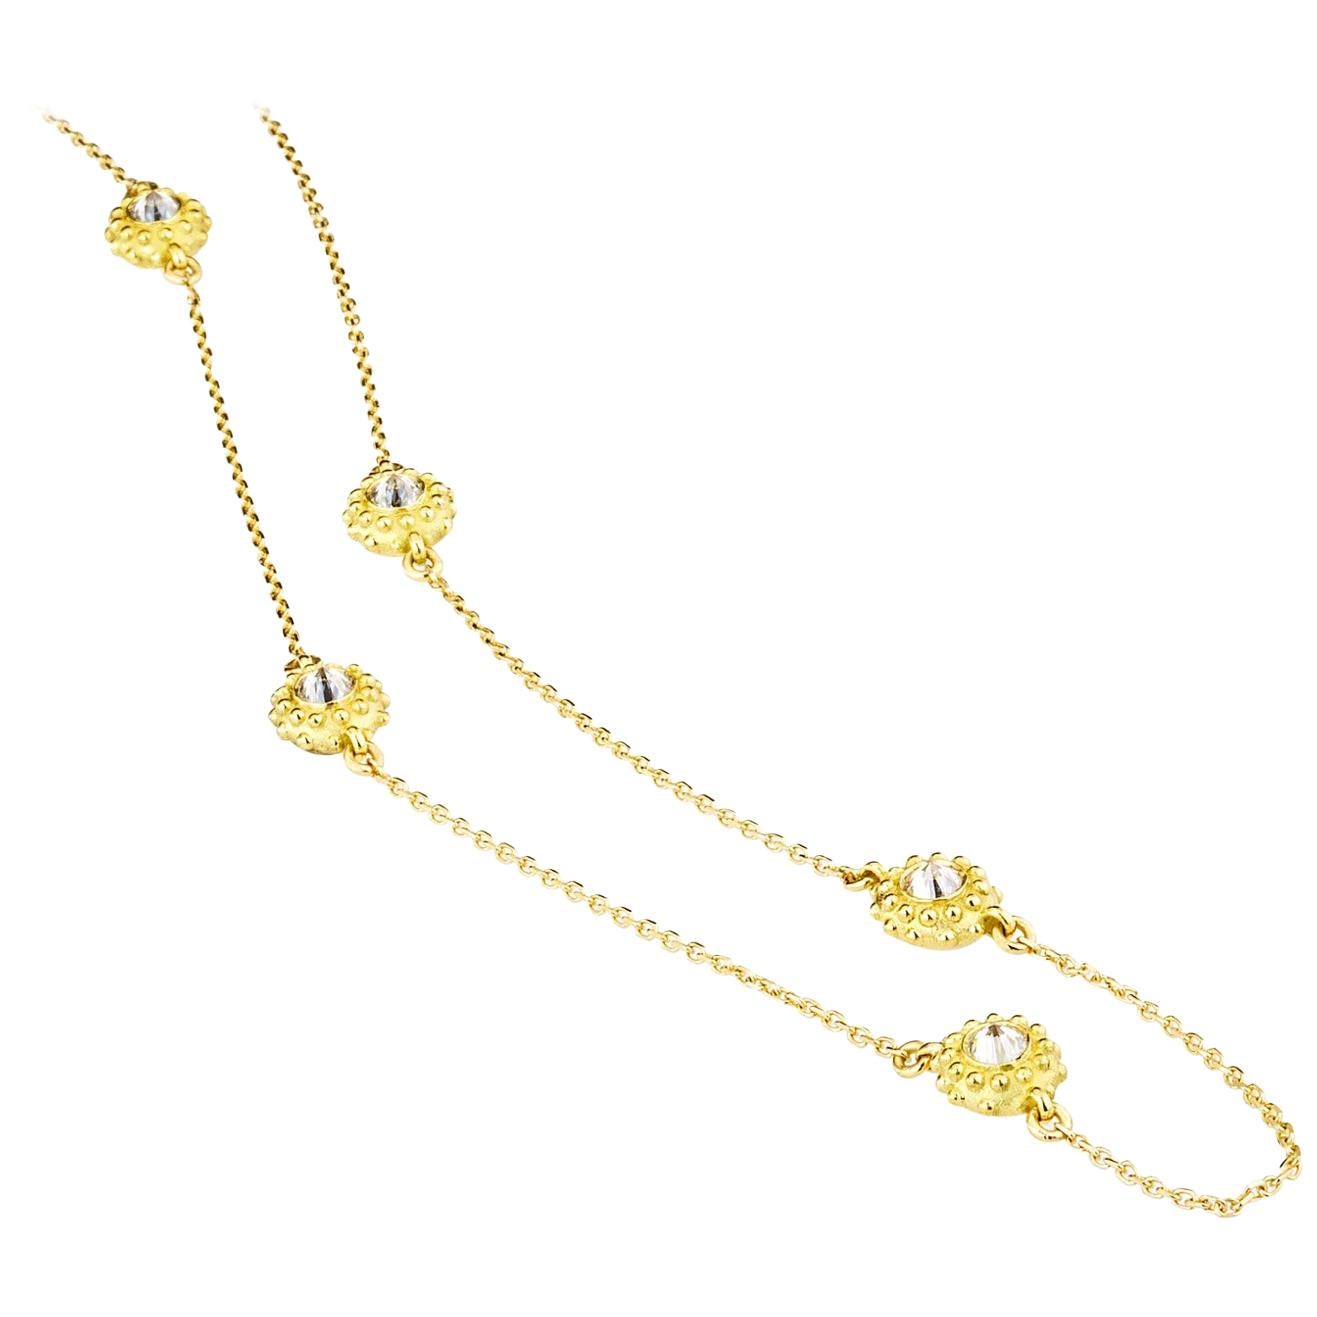 AnaKatarina 18 Karat Yellow Gold and Diamond Sea Urchin 'Intuition' Necklace For Sale